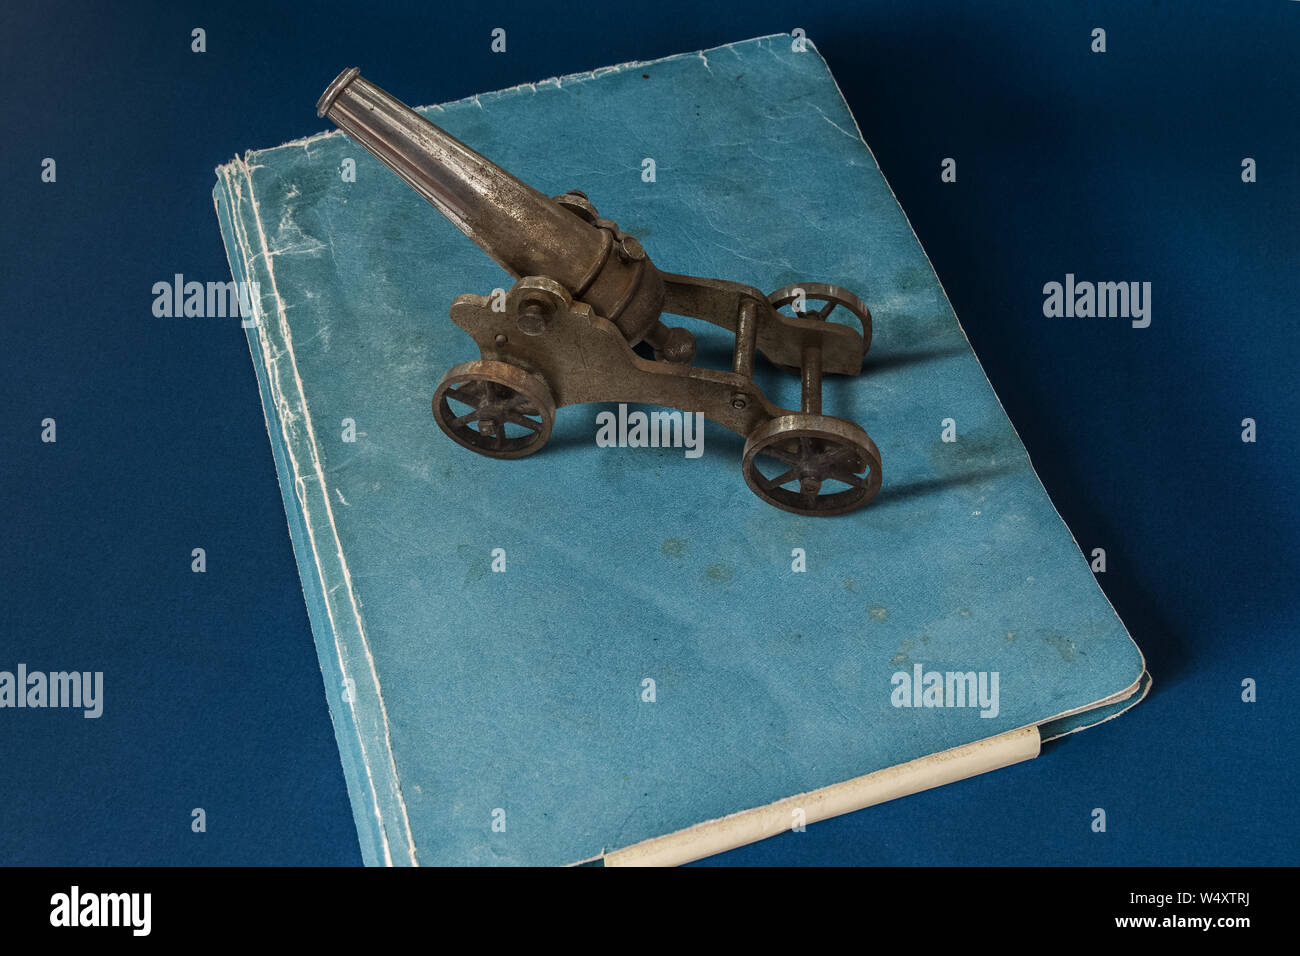 A small black powder cannon on top of a file. Stock Photo